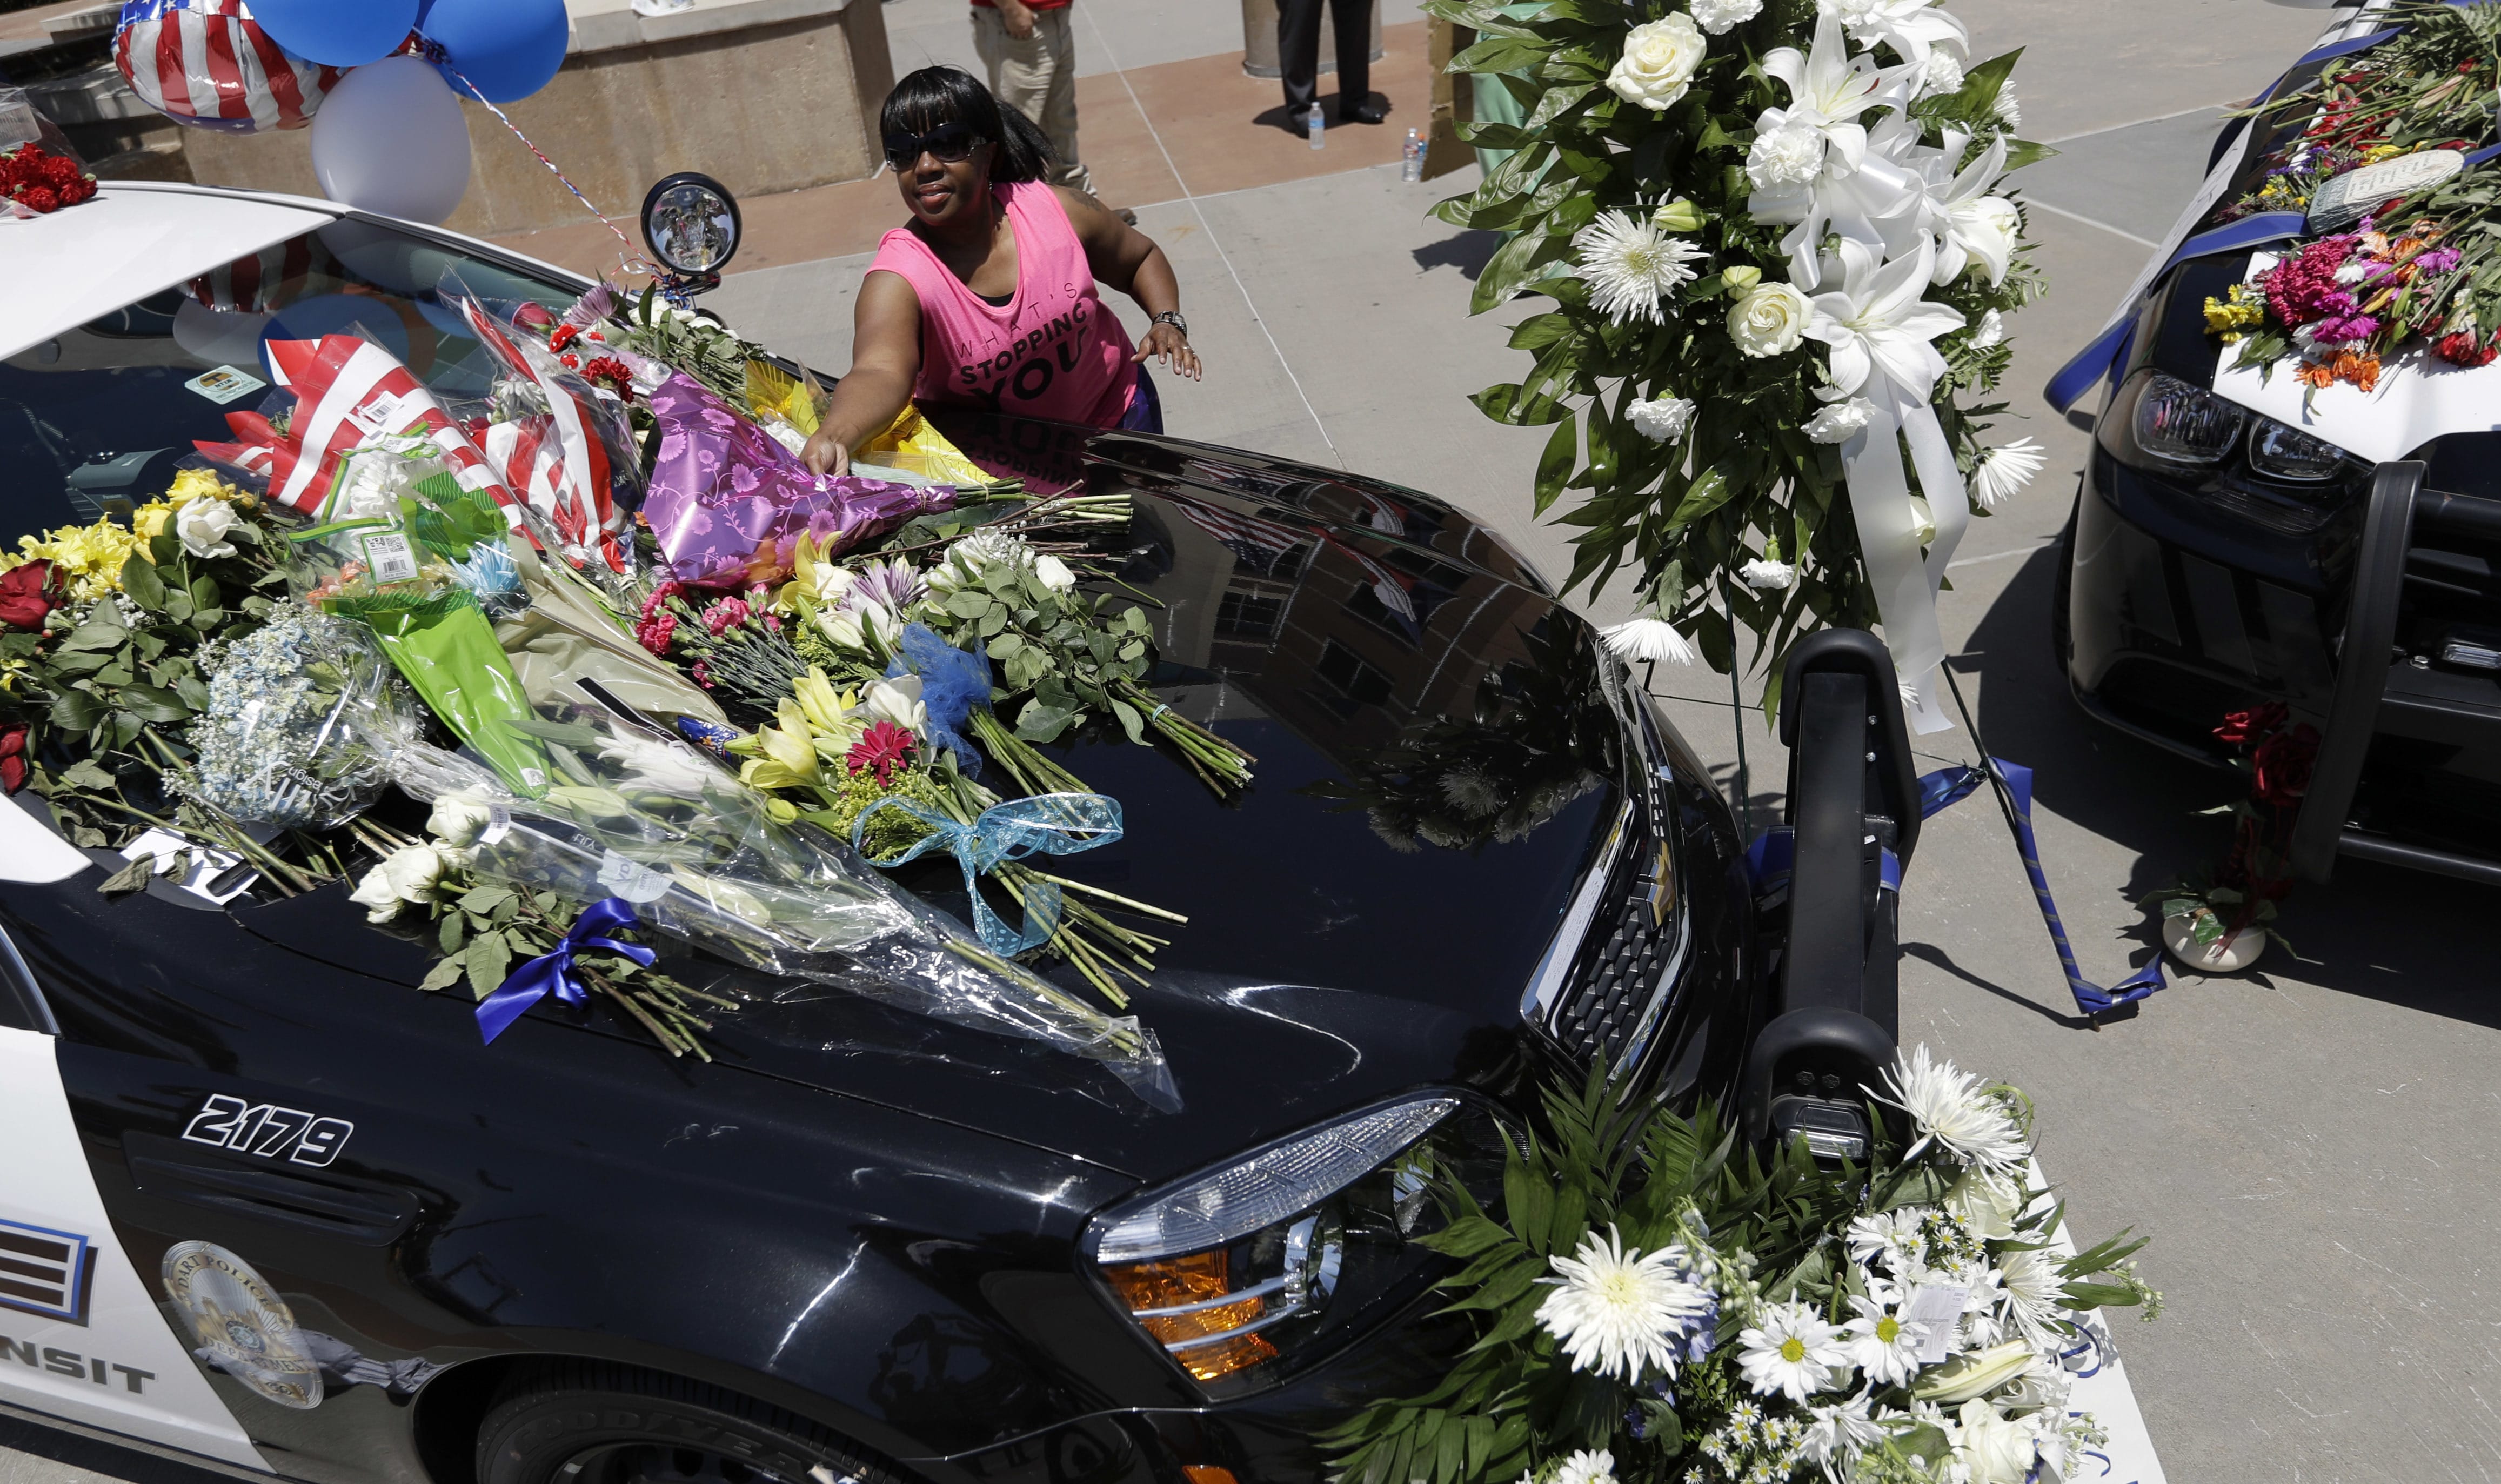 Cynthia Ware places flowers on a make-shift memorial at the Dallas police headquarters Friday in Dallas. Five police officers are dead and several injured following a shooting in downtown Dallas Thursday night.